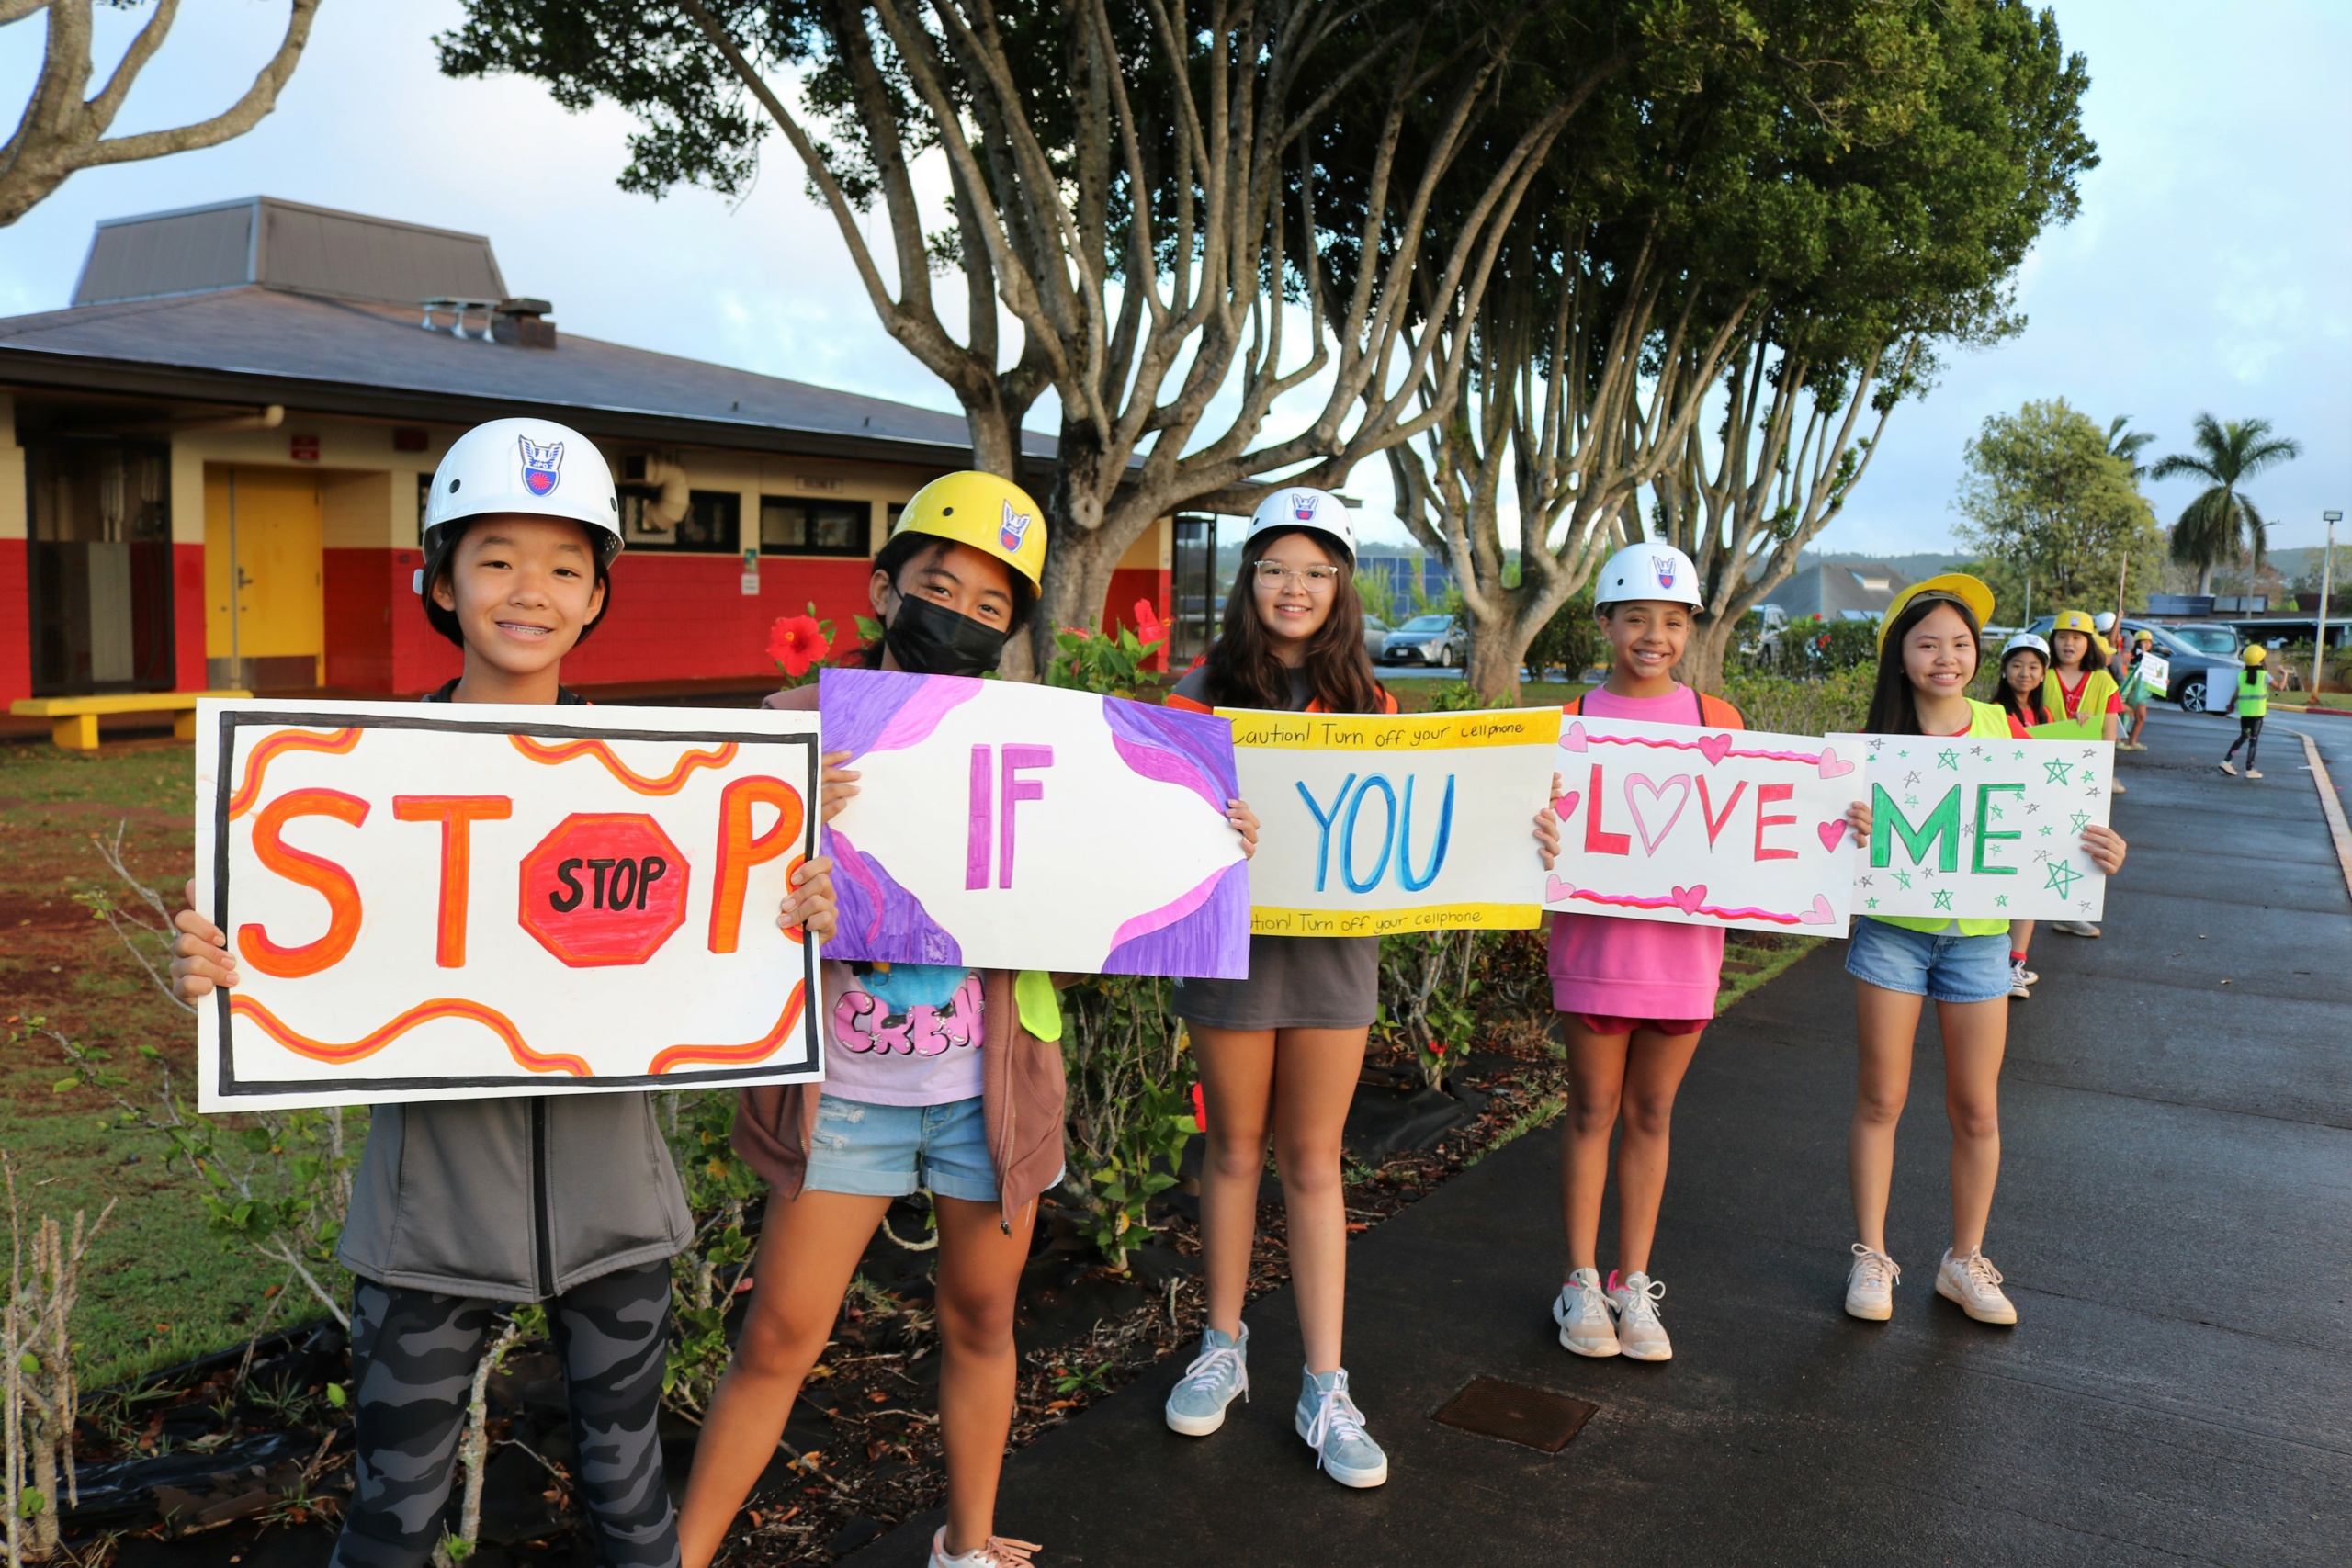 DTRIC Insurance Teams Up With Mililani Waena Elementary During DOE’s “Stop If You Love Me” Traffic Safety Week